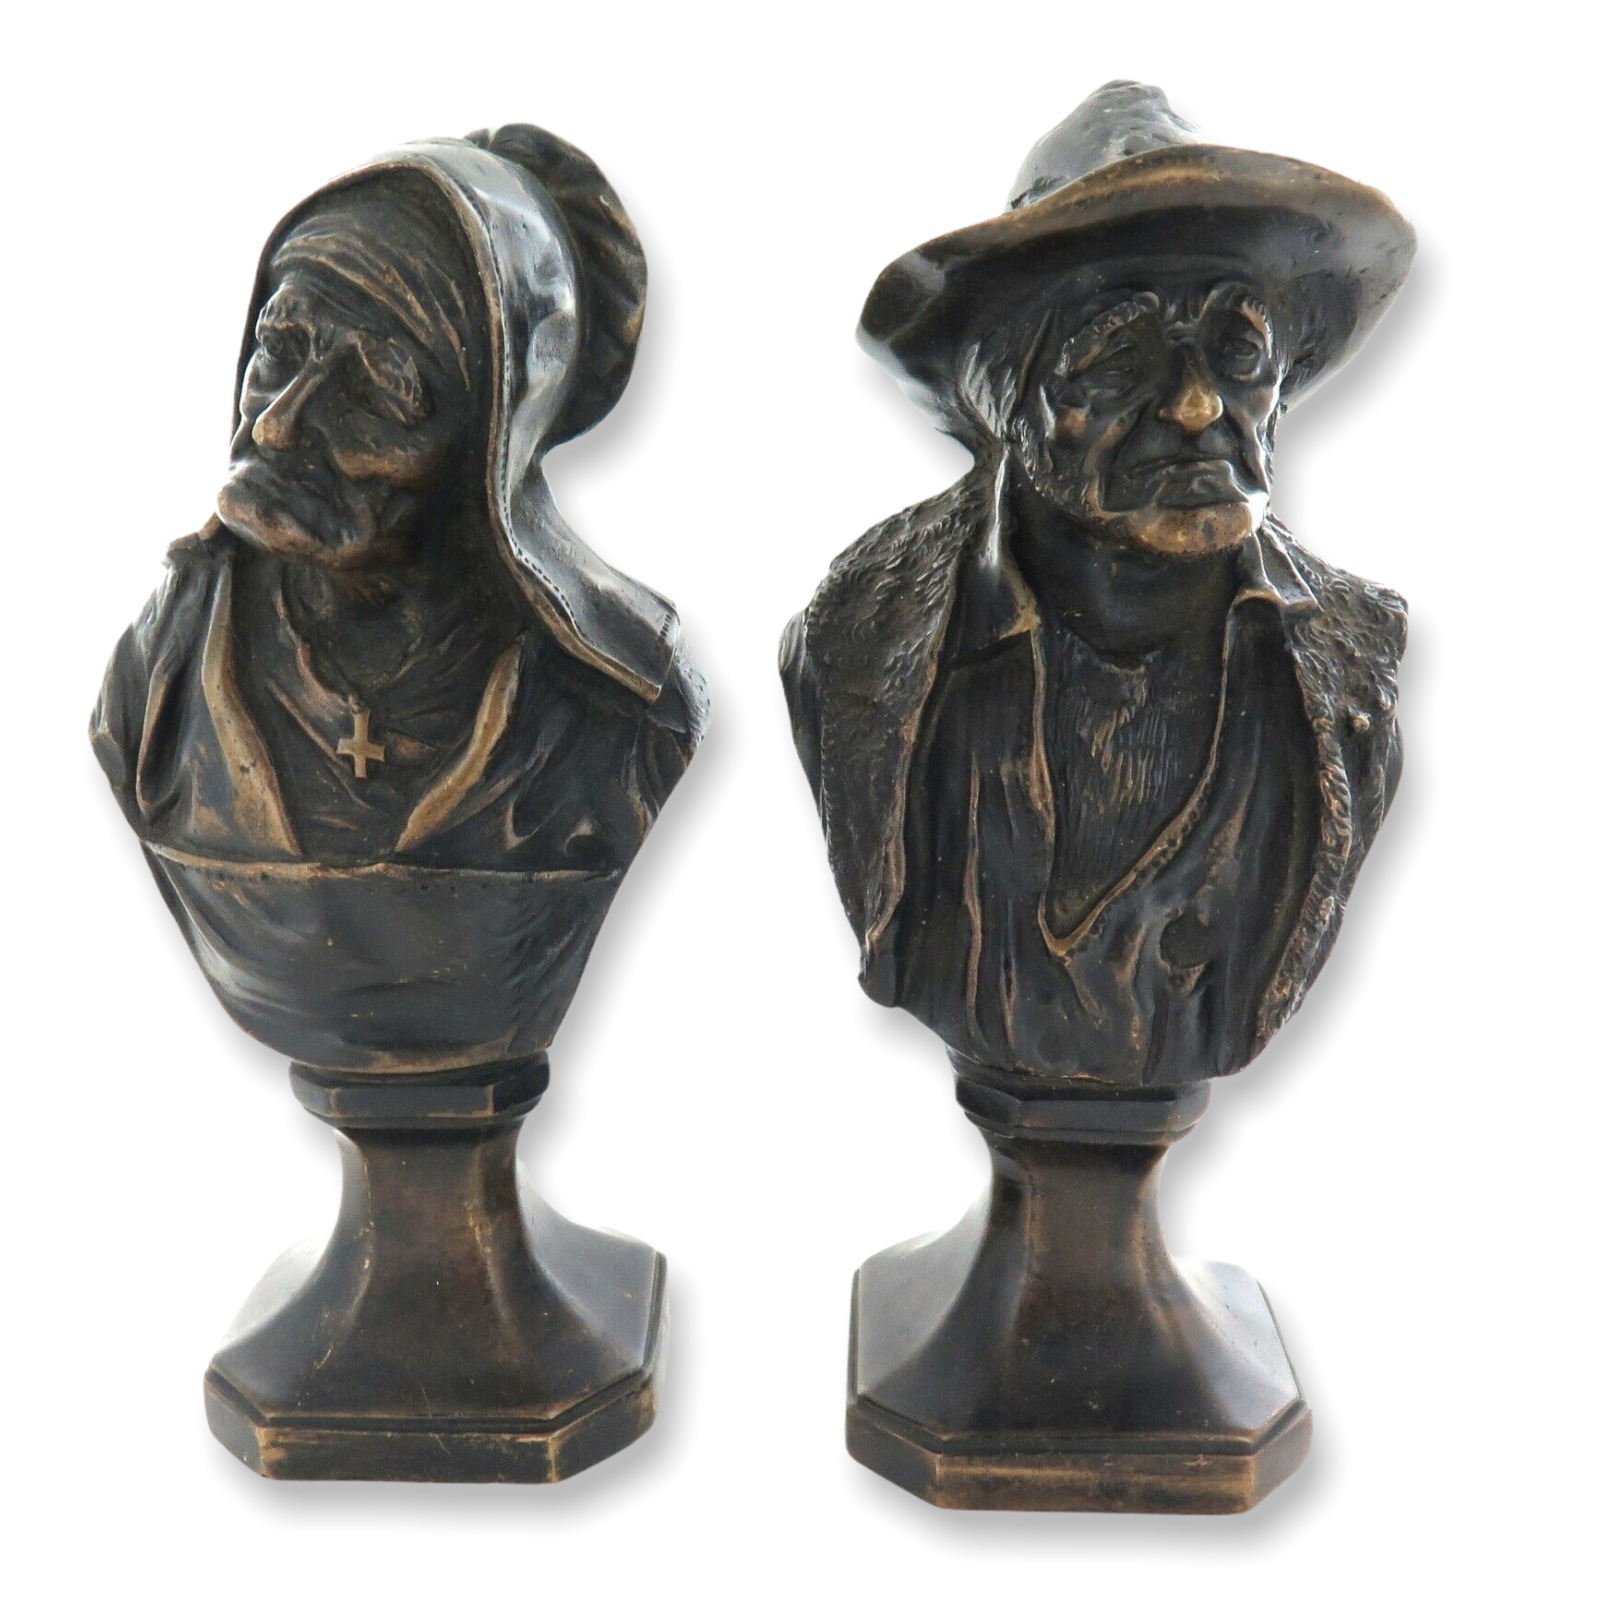 .ANTIQUE SUPERB PAIR COLD PAINTED BRONZES. AGED WEATHERED FACES HUSBAND & WIFE